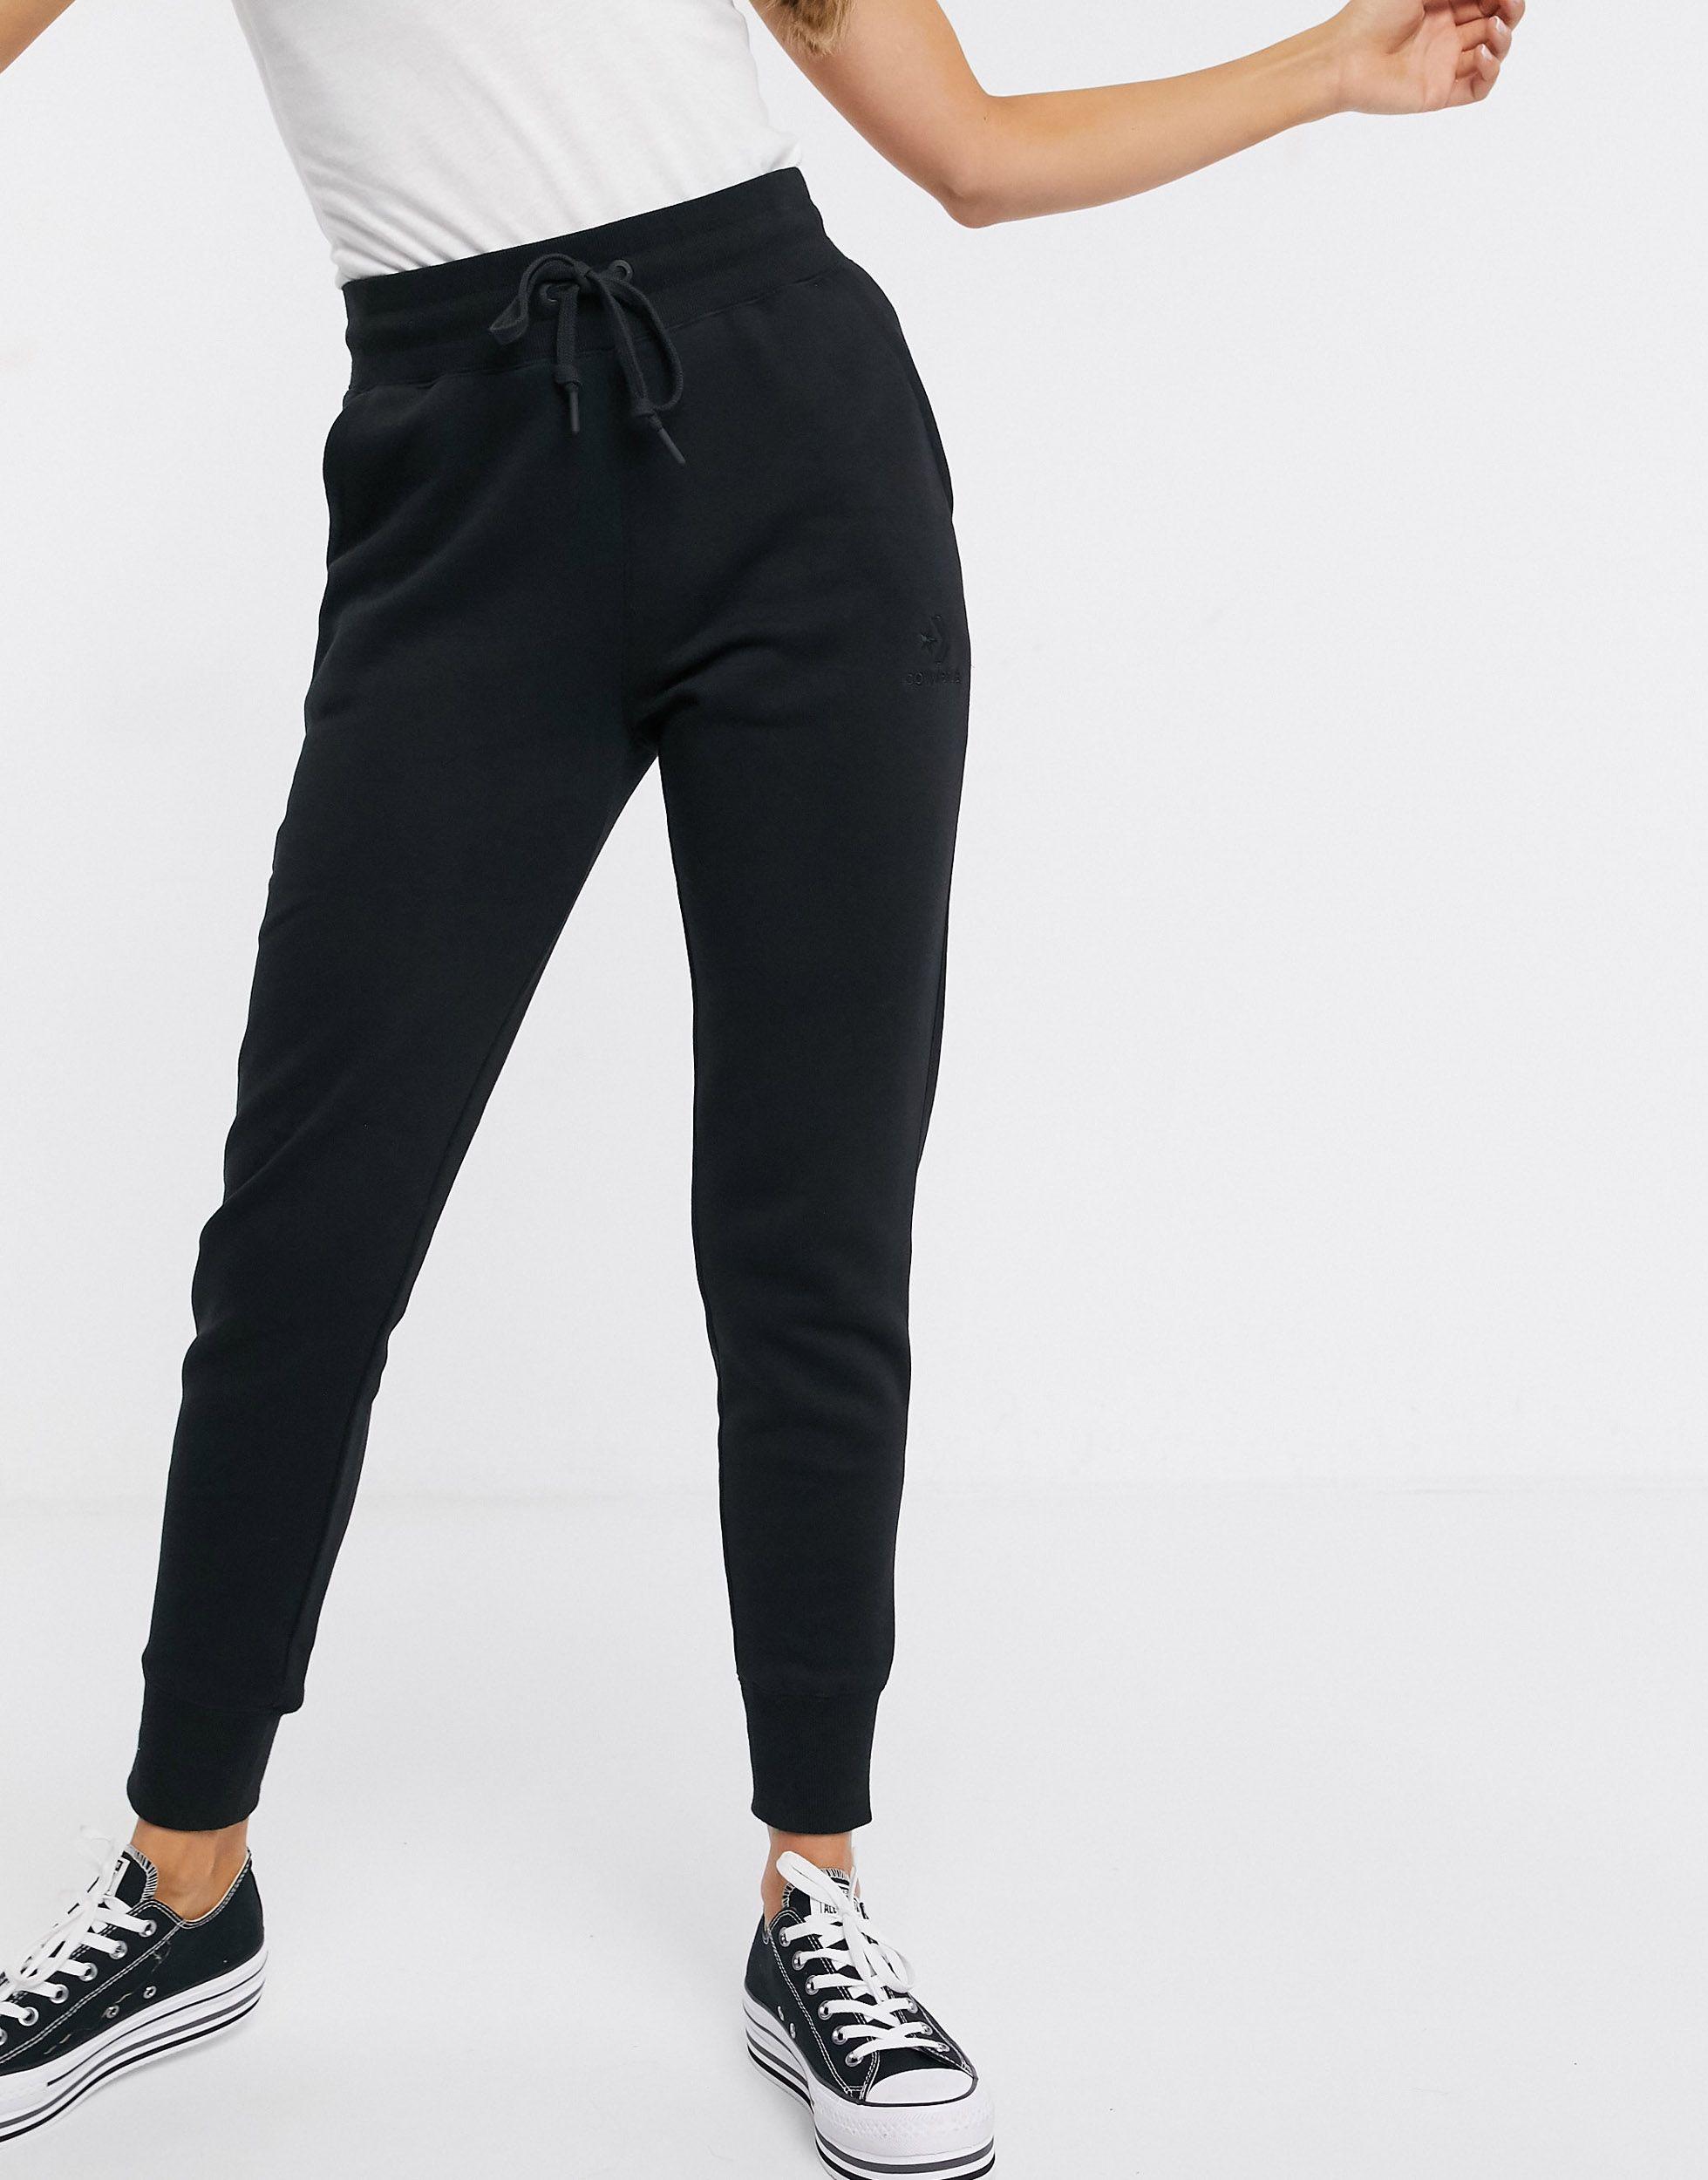 Converse High Waisted Slim Fit Black joggers | Lyst